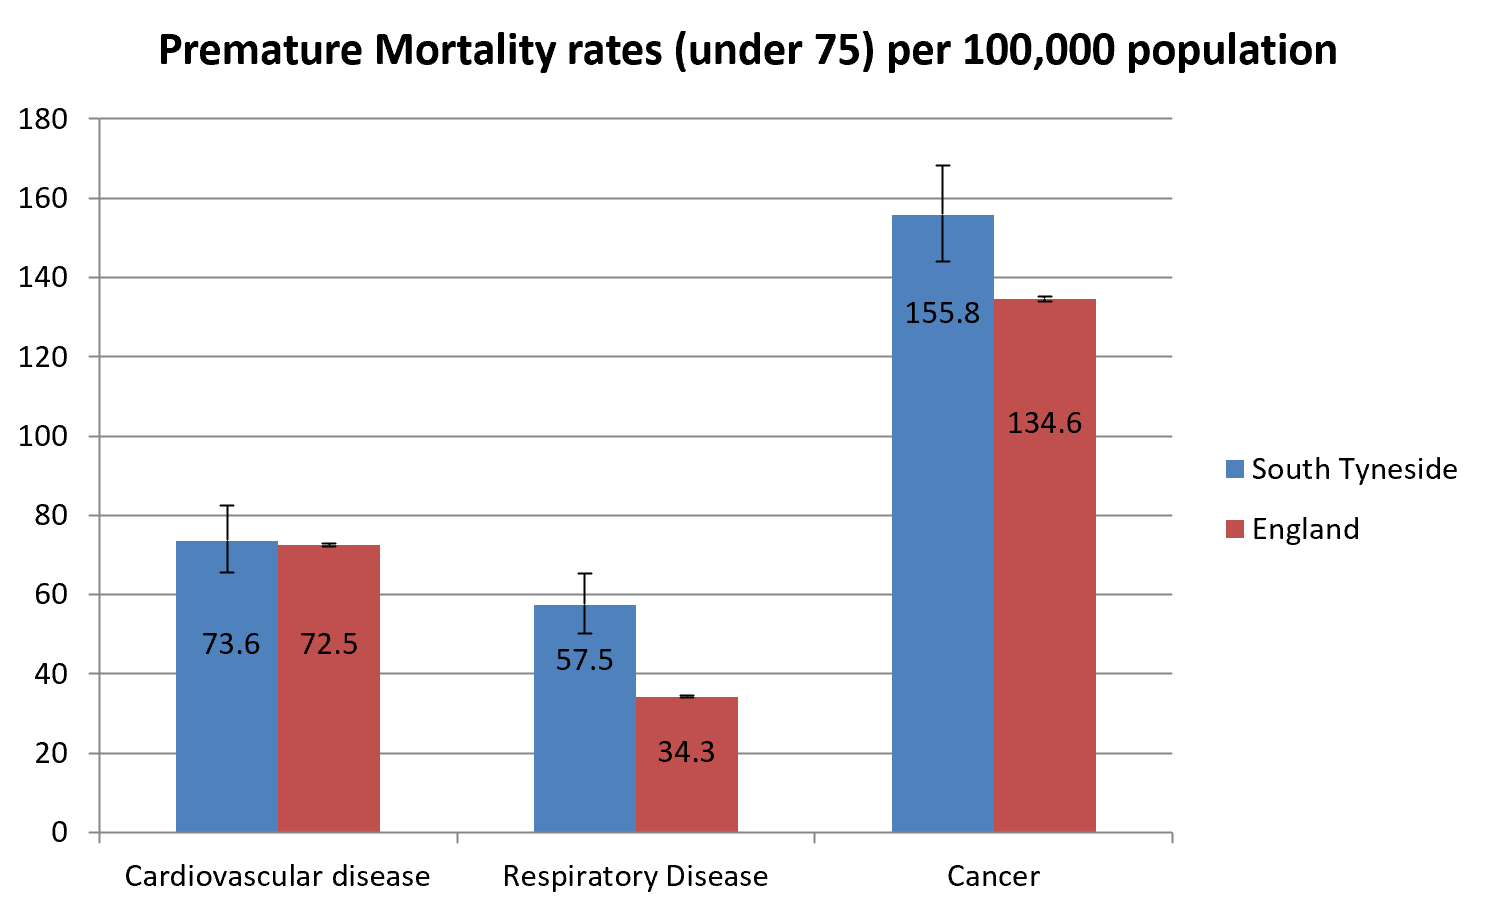 Bar chart of premature mortality rates (under 75) per 100,000 population in South Tyneside and England